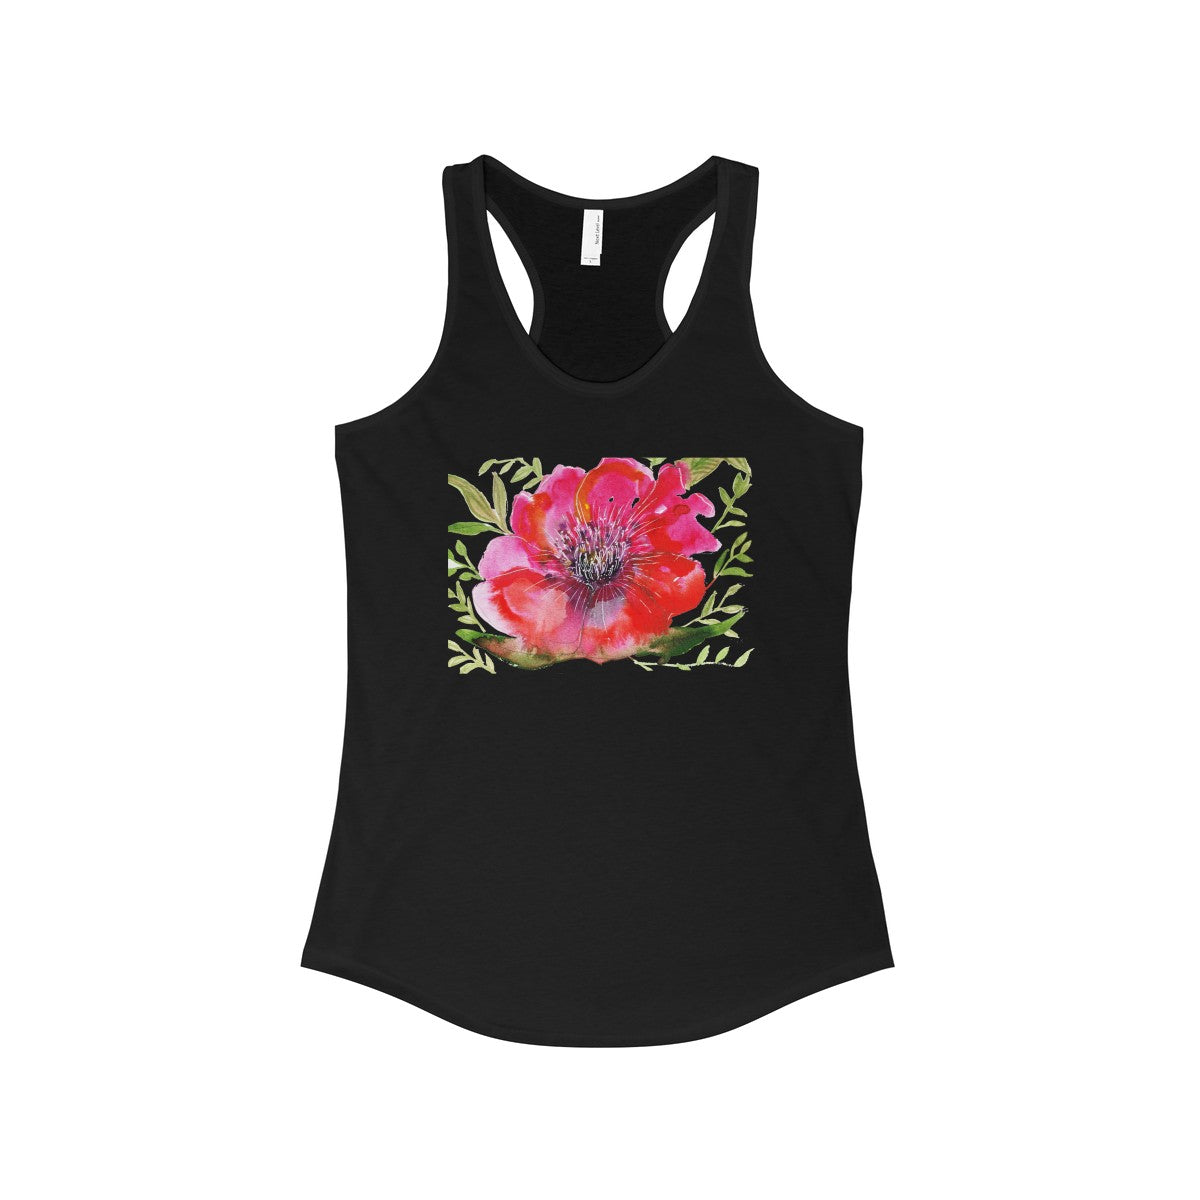 Red Designer Best Floral Women's Ideal Racerback Tank - Made in the USA-Tank Top-Solid Black-L-Heidi Kimura Art LLC Red Hibiscus Flower Tank Top, Red Designer Best Floral Women's Ideal Racerback Tank - Made in the U.S.A. (US Size: XS-2XL)